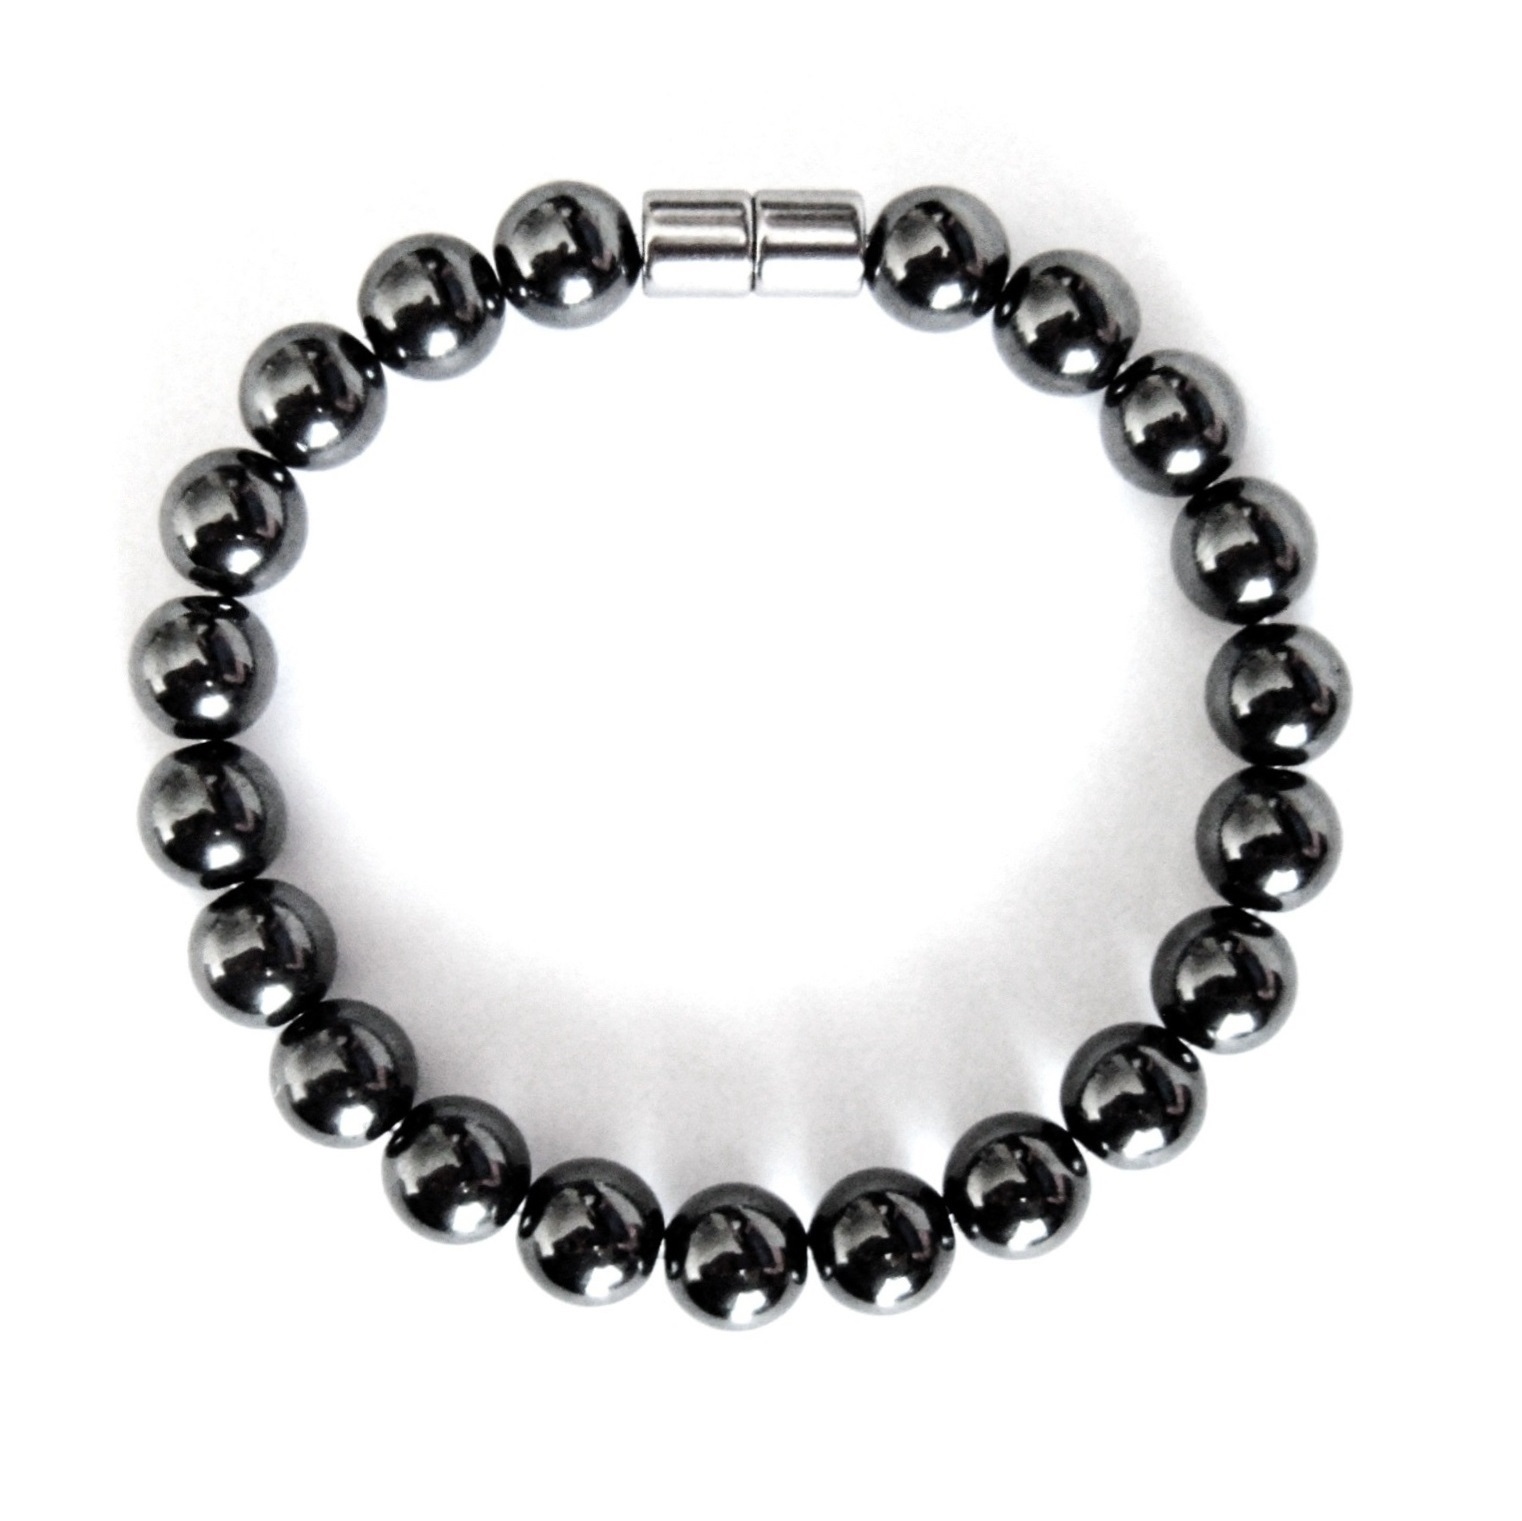 1 PC. (Magnetic) All 8mm  Magnetic Therapy Bracelet Hematite Bracelet For Men And Women #MHB0037